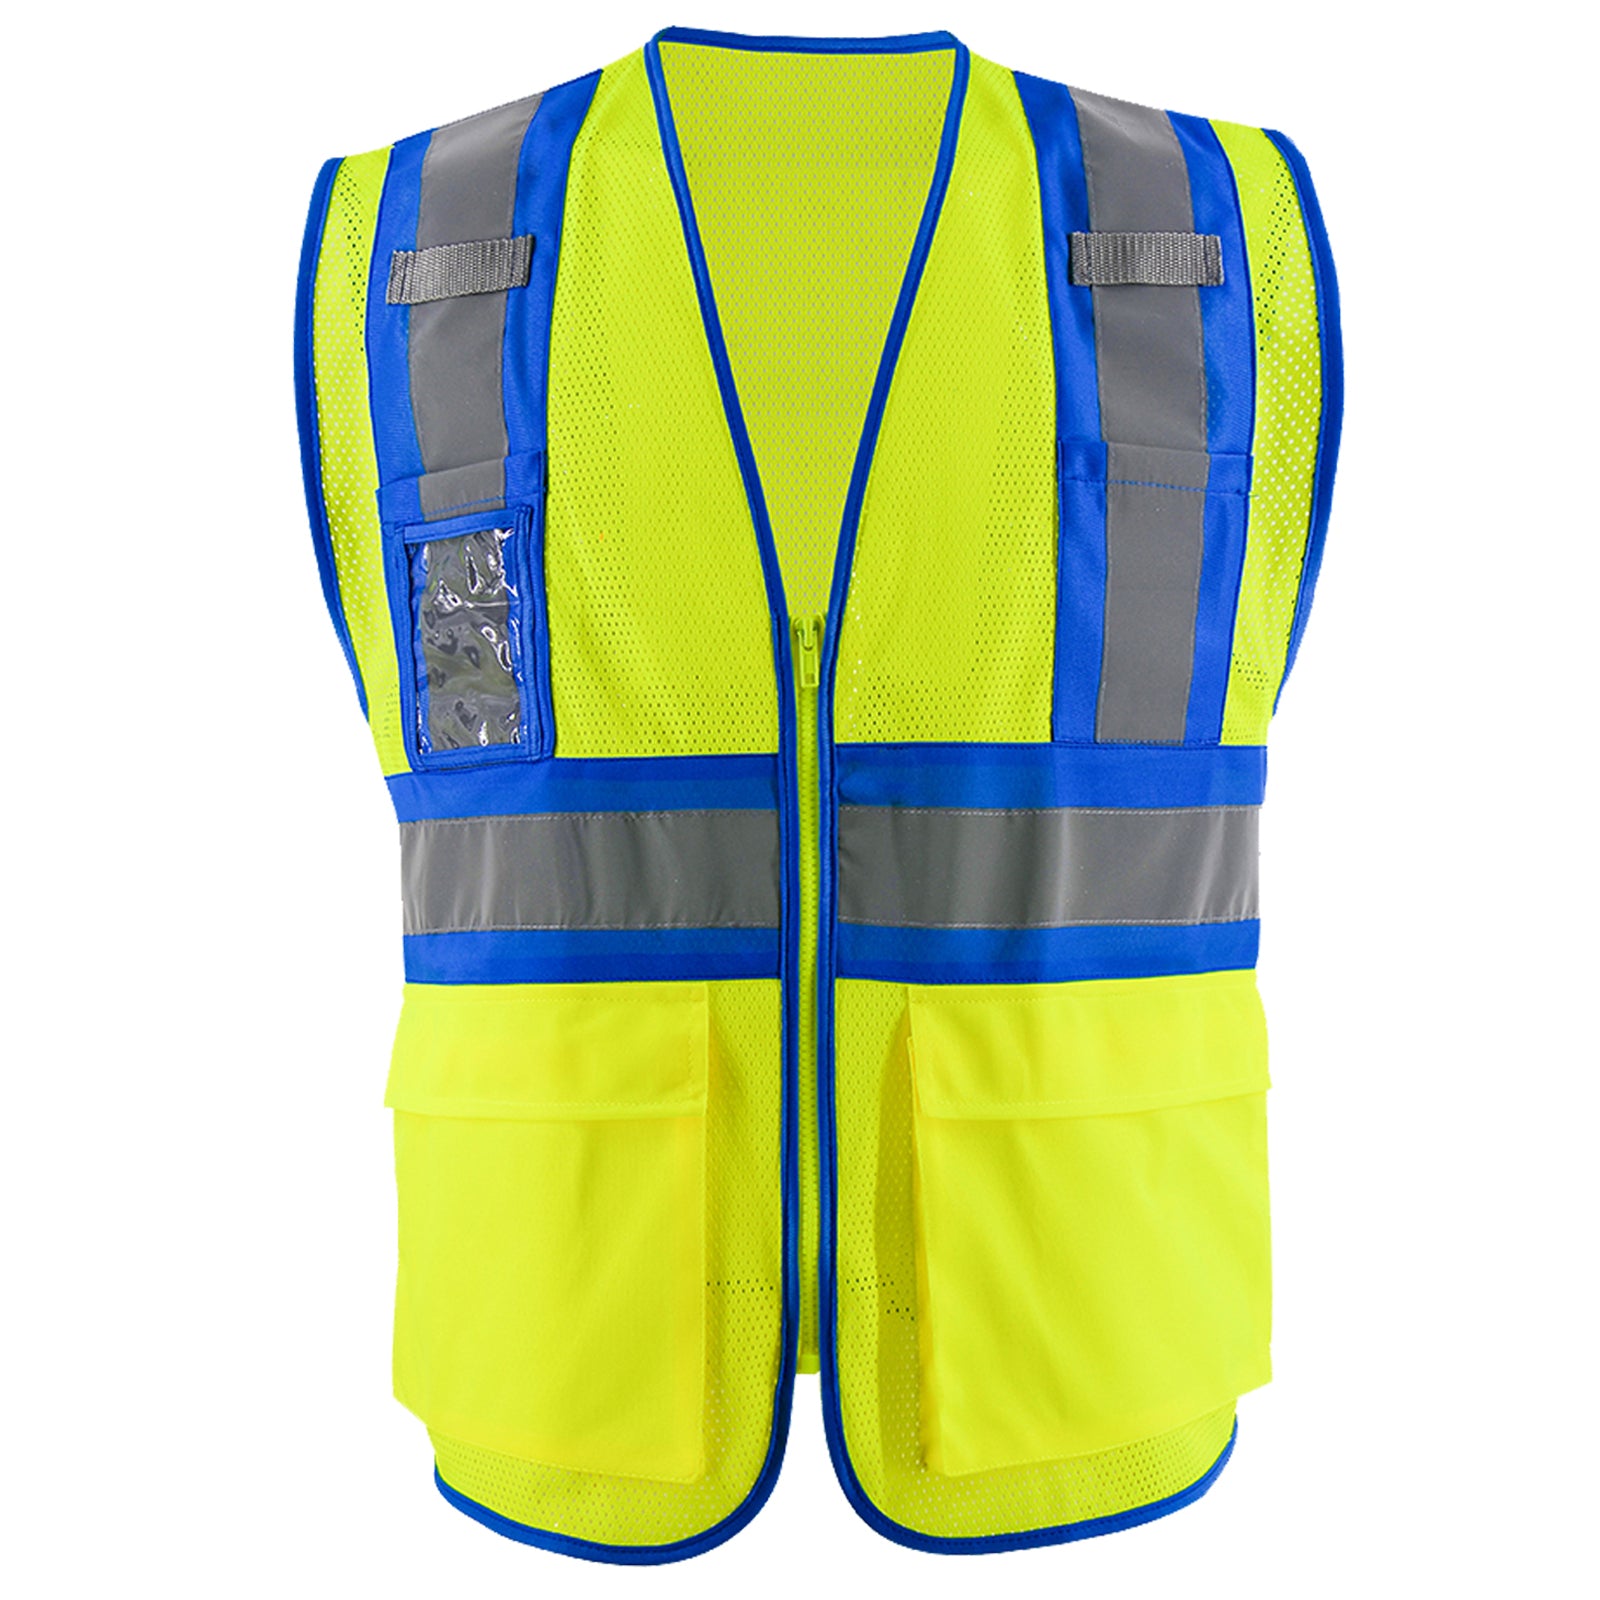 SMASYS High Visibility Reflective Safety Vest with 5 Pockets and